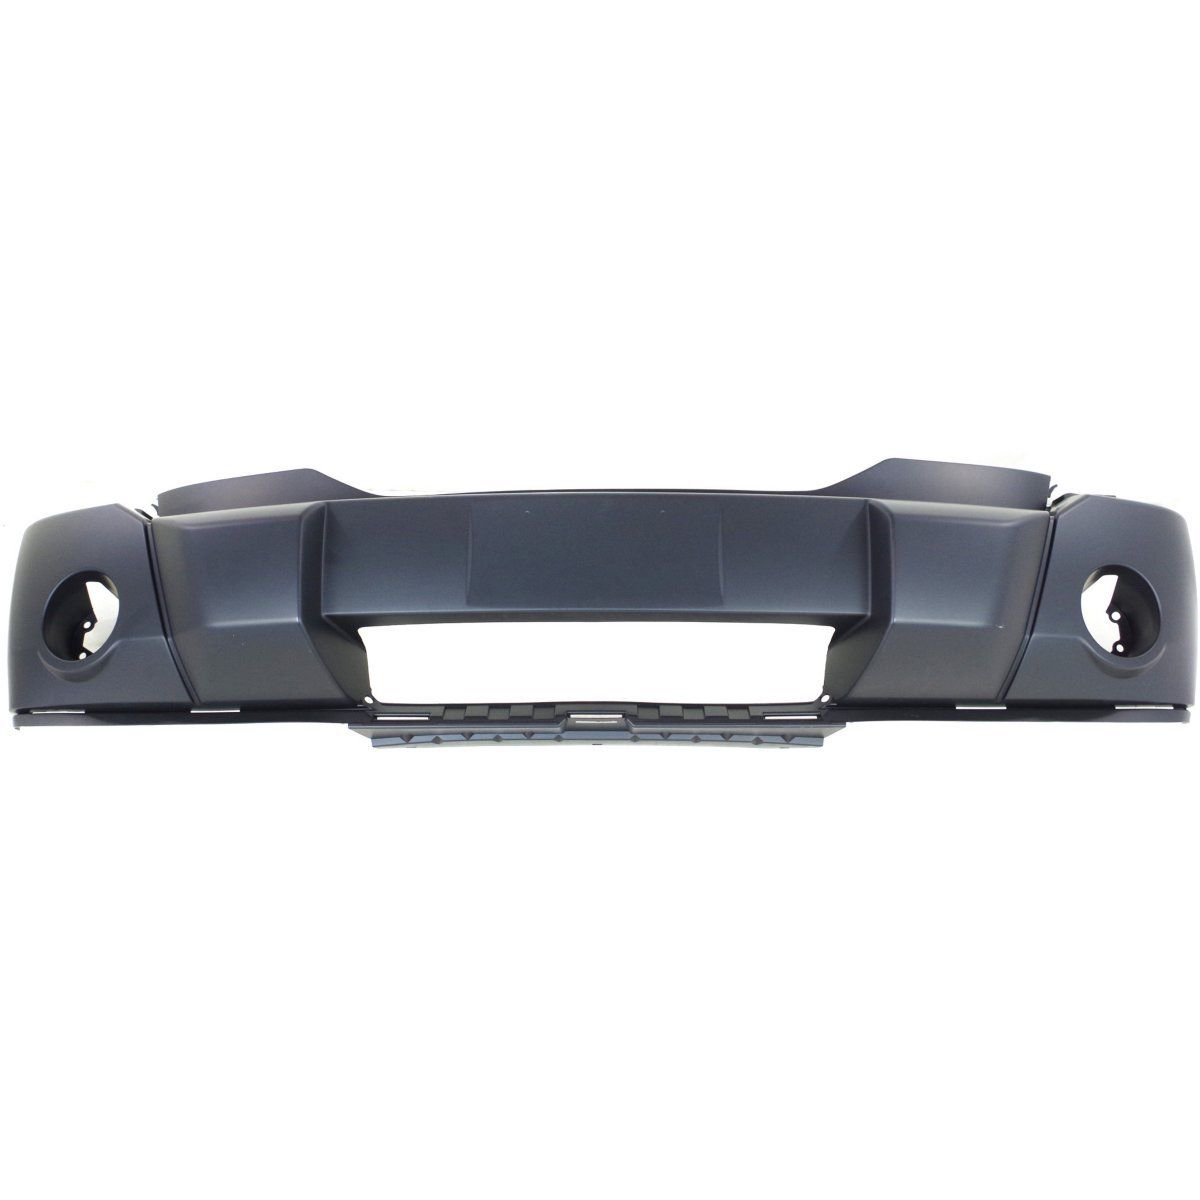 2007-2011 DODGE NITRO Front Bumper Cover Painted to Match